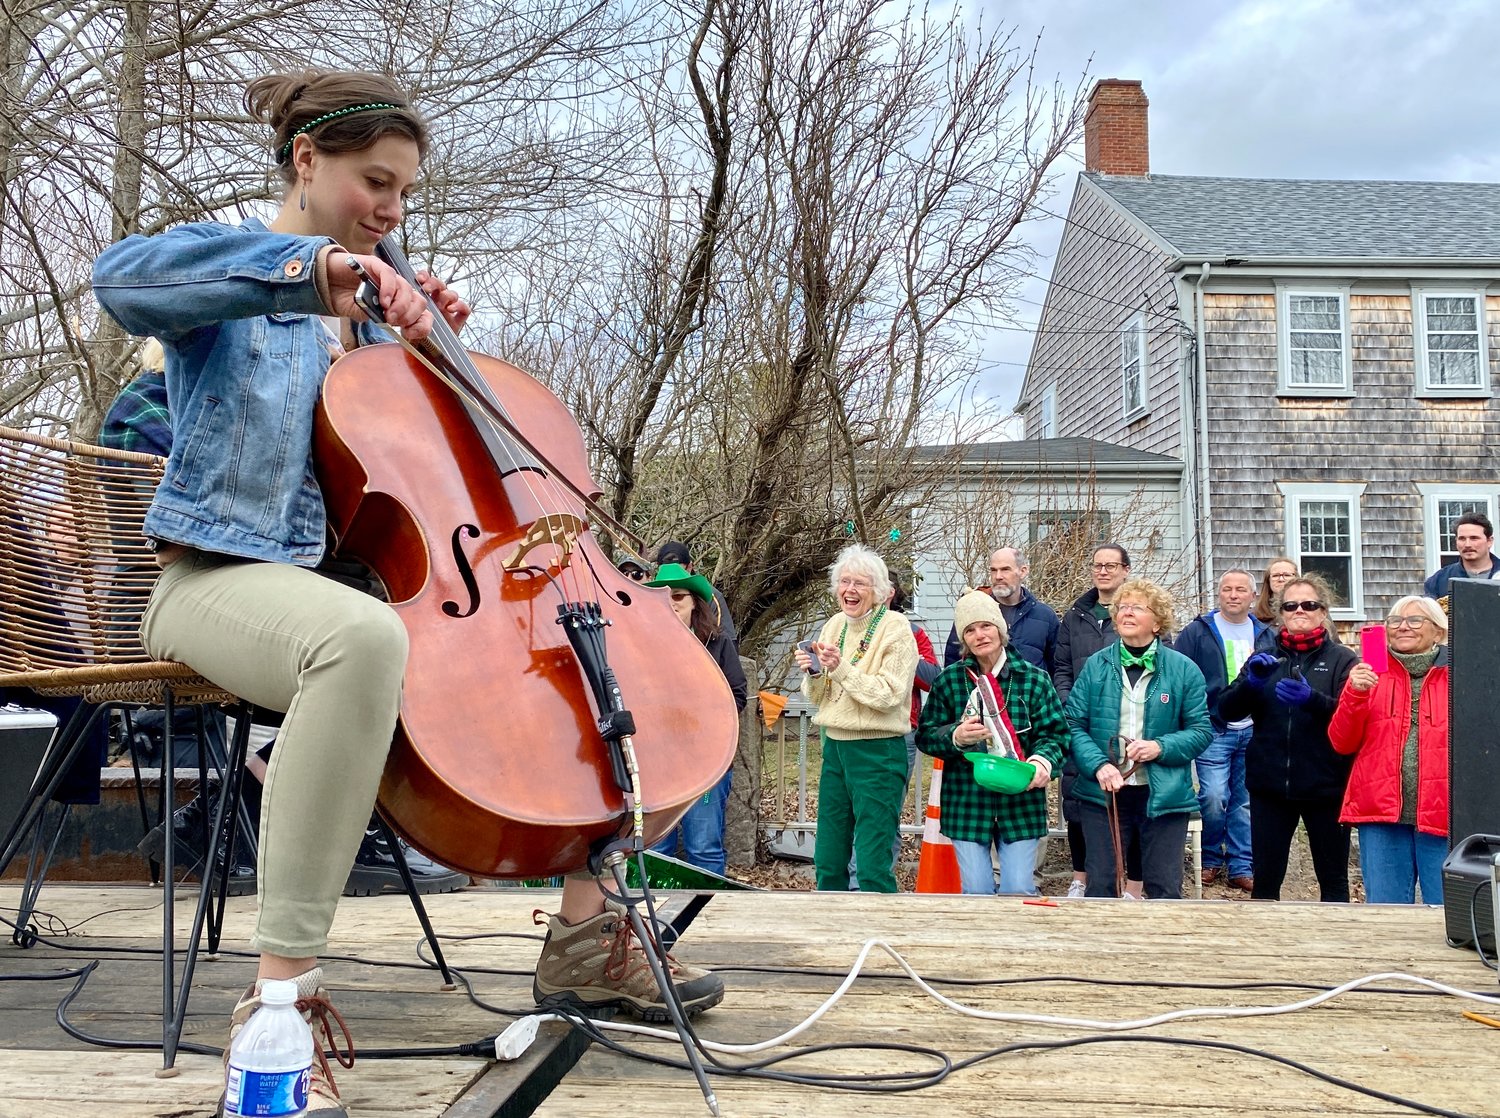 Polly Gardner (center rear), bass player and singer for the Spindle Rock River Rats, gets into the music as Scottish Fish performs during the parade.